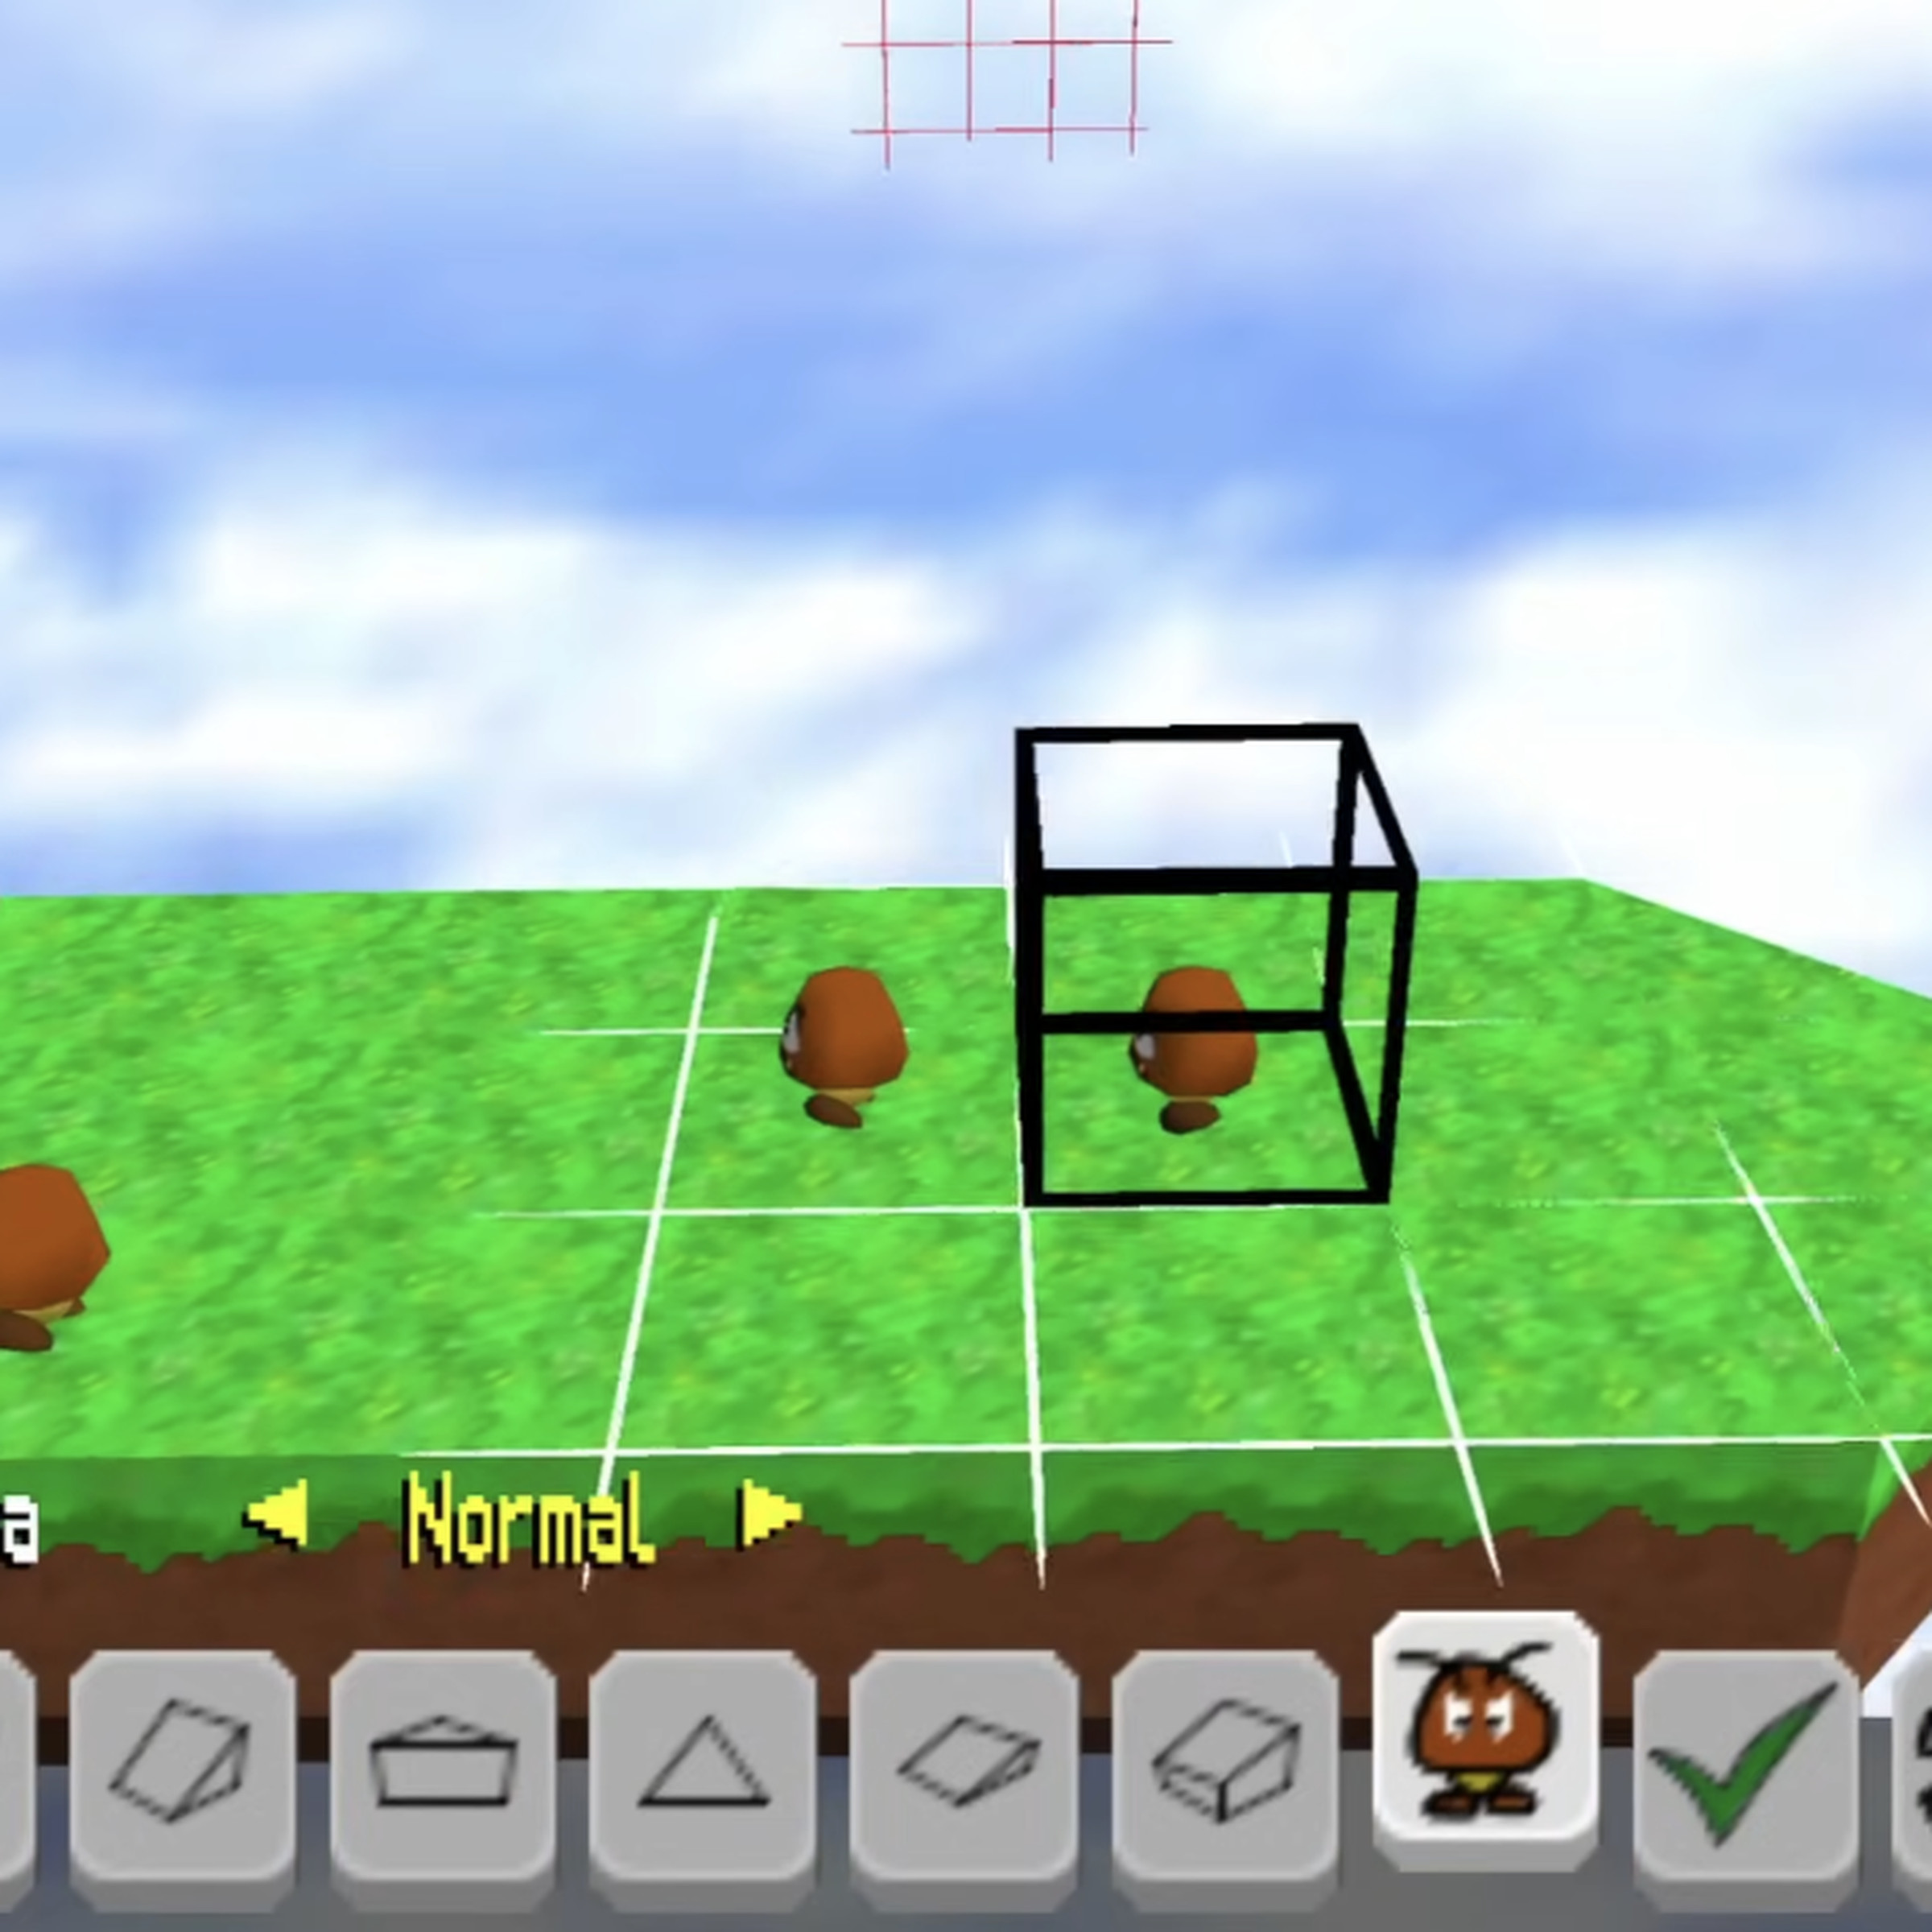 Screenshot showing the interface for placing objects in Mario Builder 64.